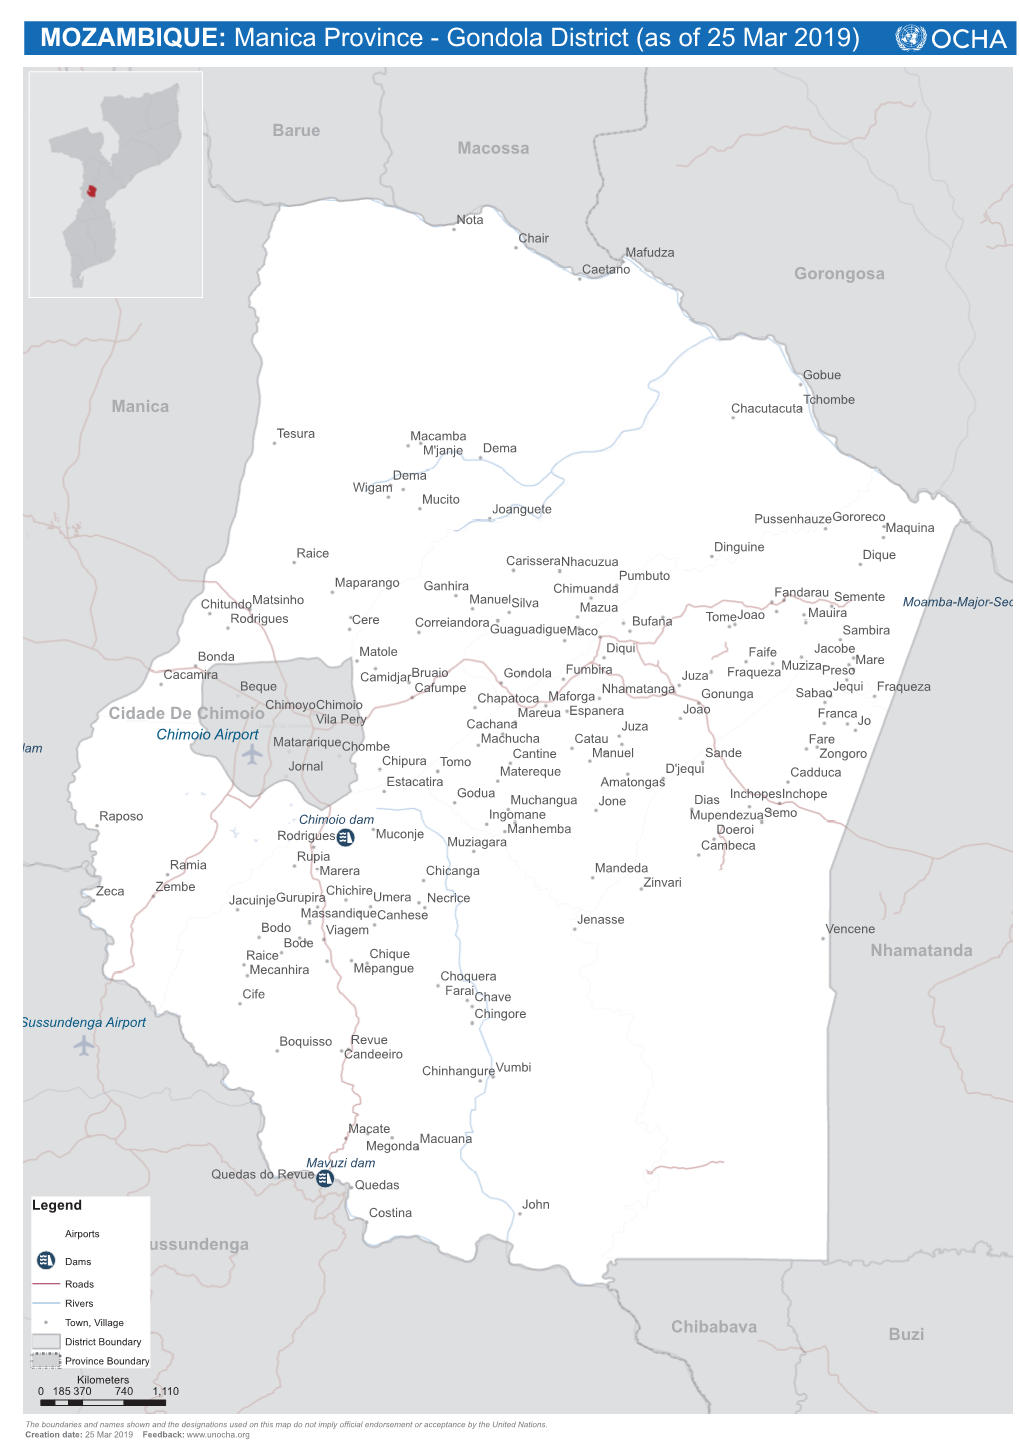 MOZAMBIQUE: Manica Province - Gondola District (As of 25 Mar 2019)